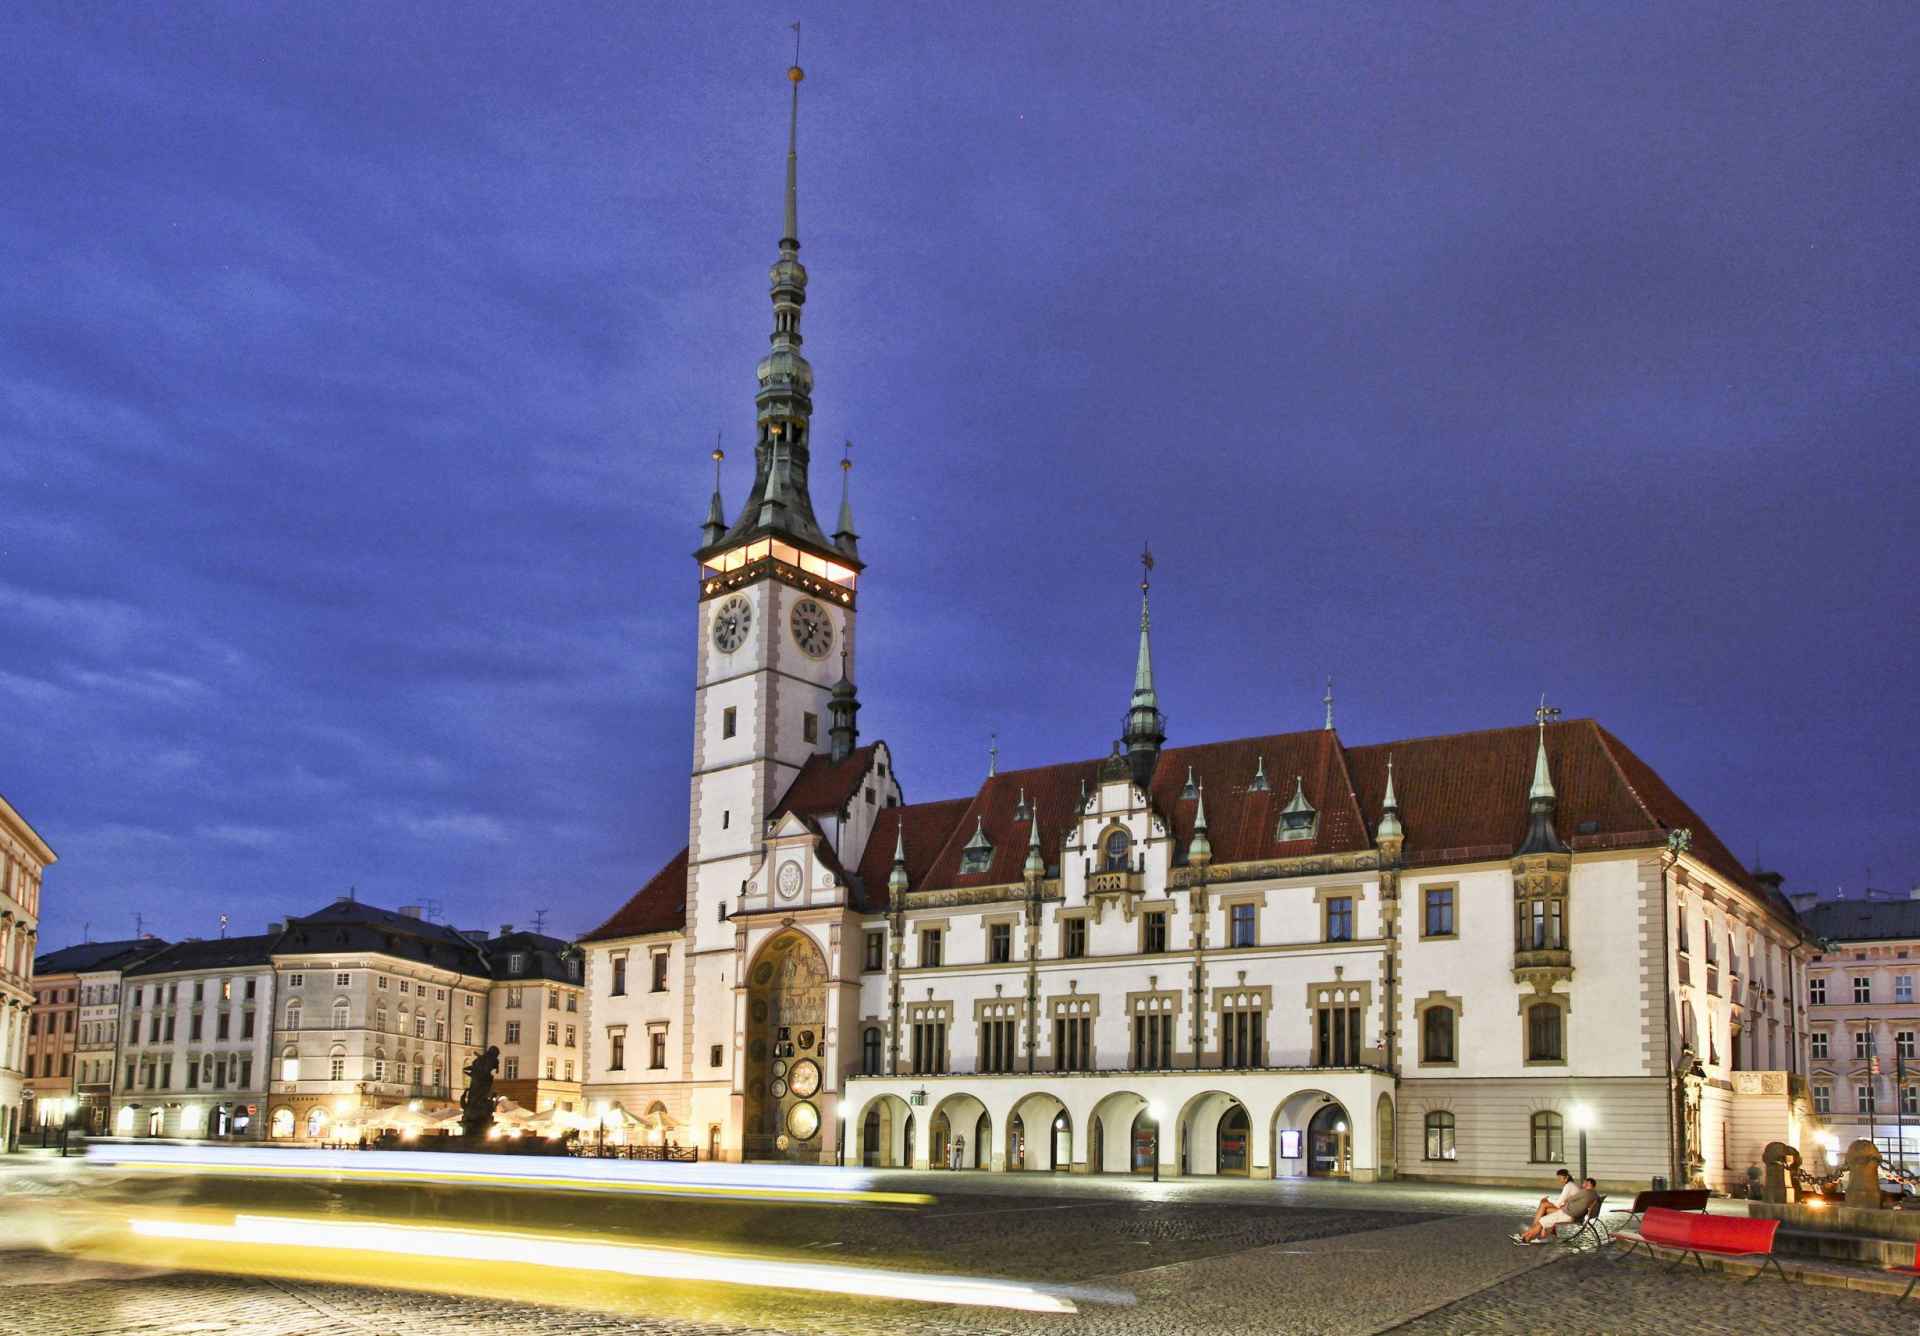 Olomouc Town Hall with the astronomical clock